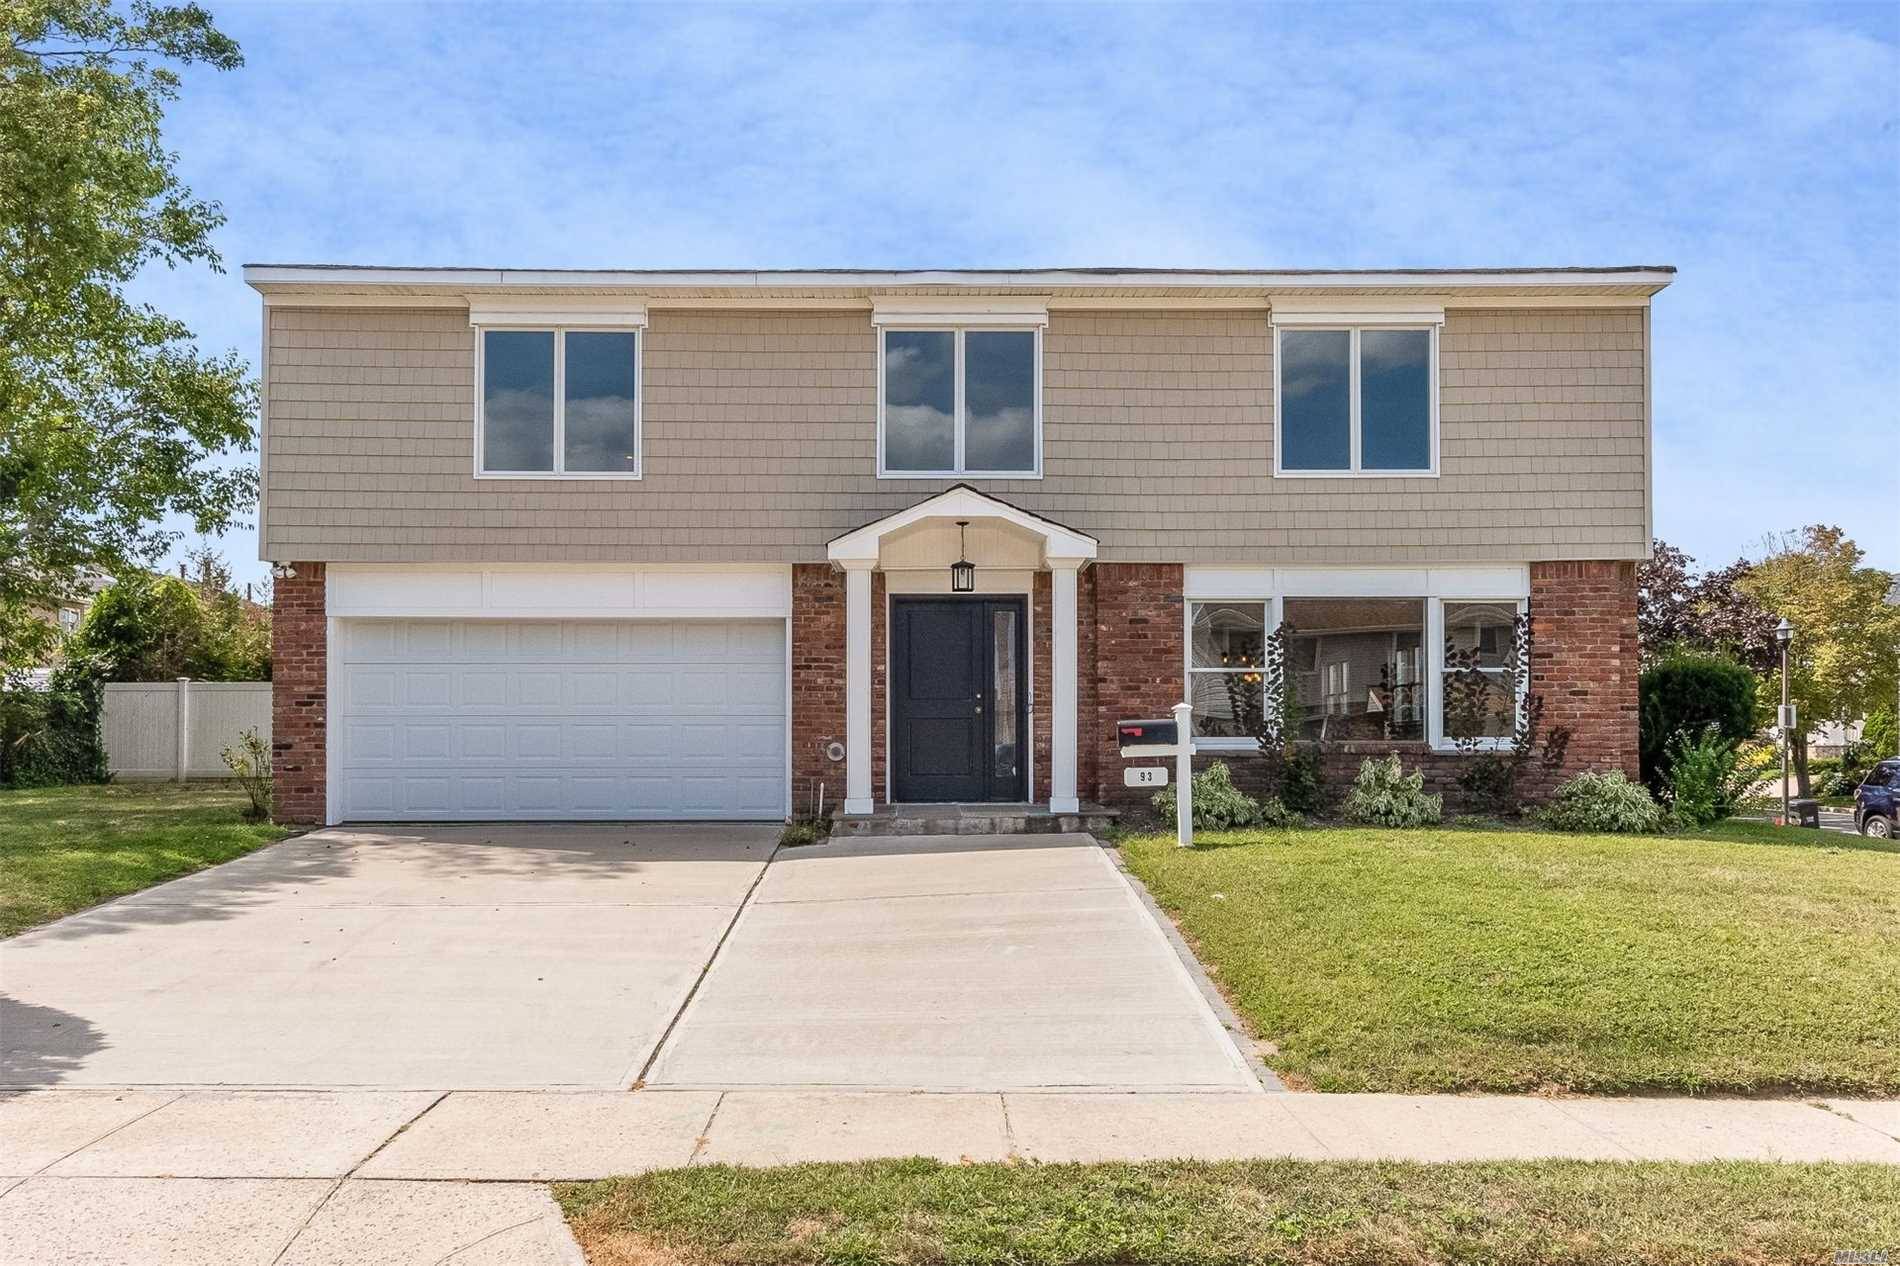 Enjoy Luxury In This 2,709 Sq Ft Colonial Perfectly Situated In The Estates Section Of Atlantic Beach.